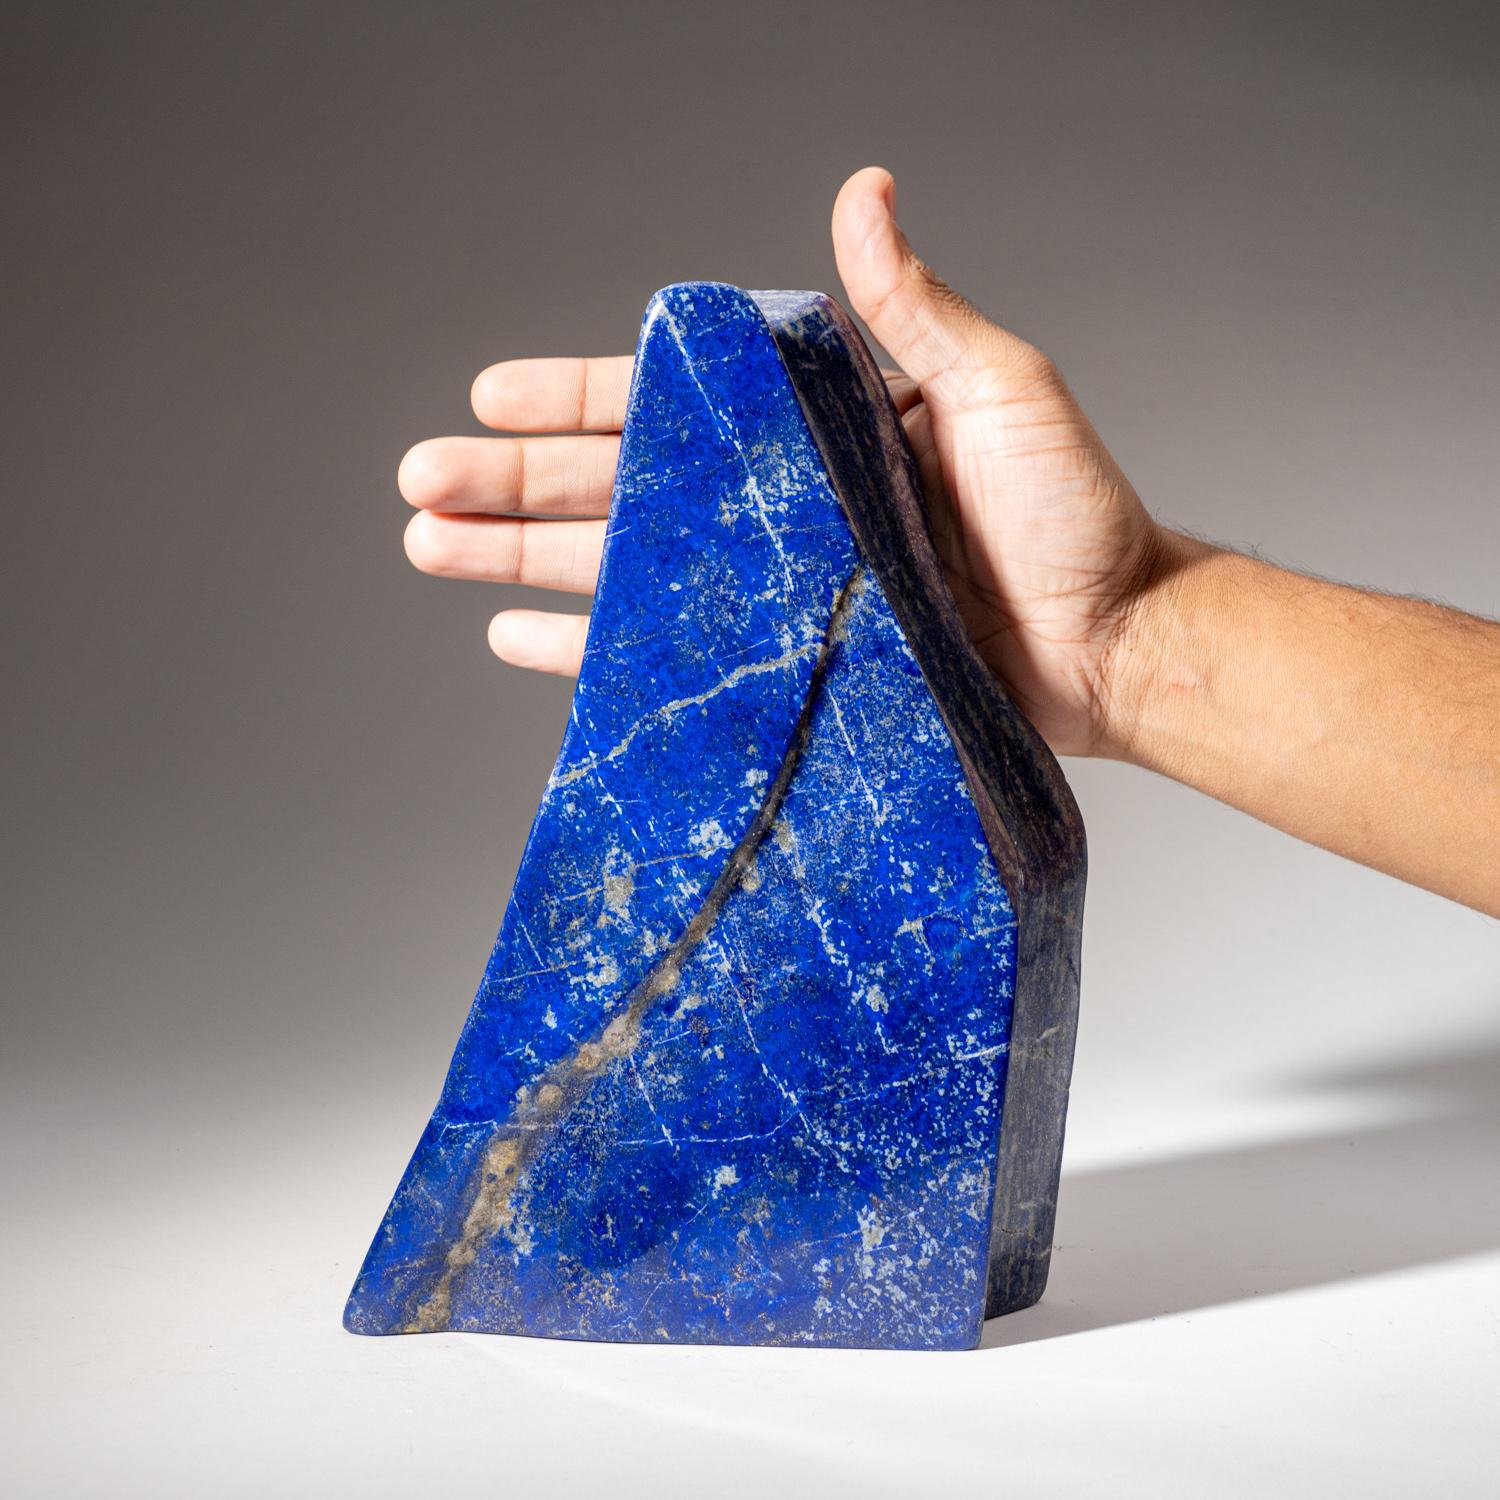 Polished Lapis Lazuli Freeform from Afghanistan (7.4 lbs) For Sale 1